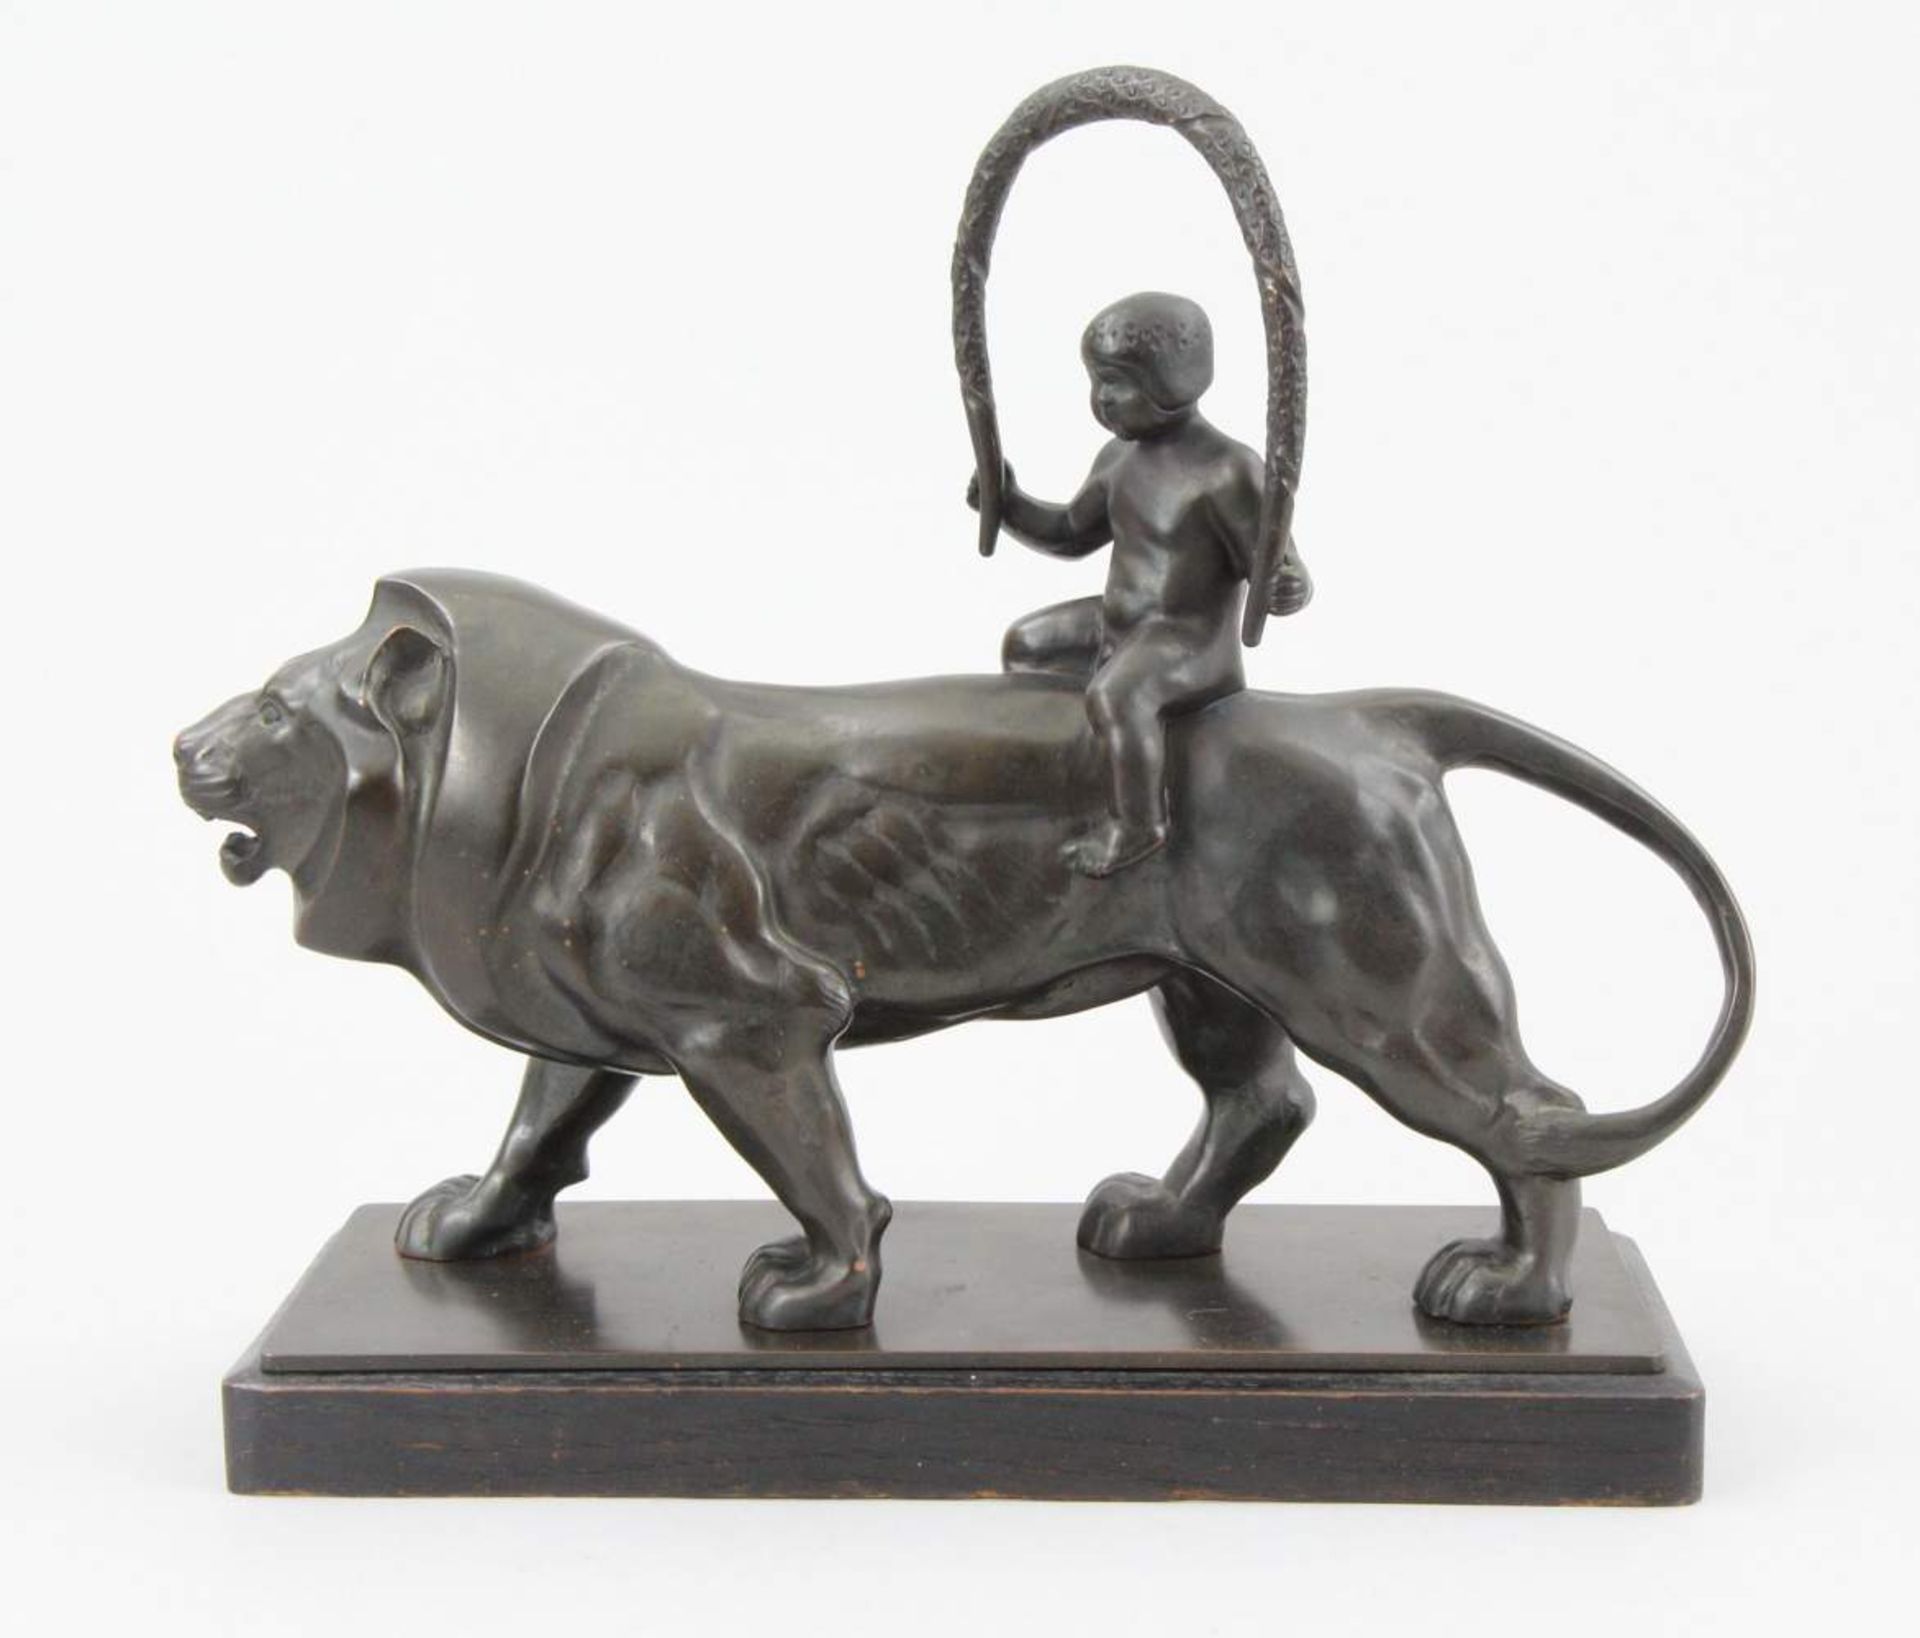 Germn early 20th century sculptor Figure, patinated bronze, naked boy riding a lion, original wooden